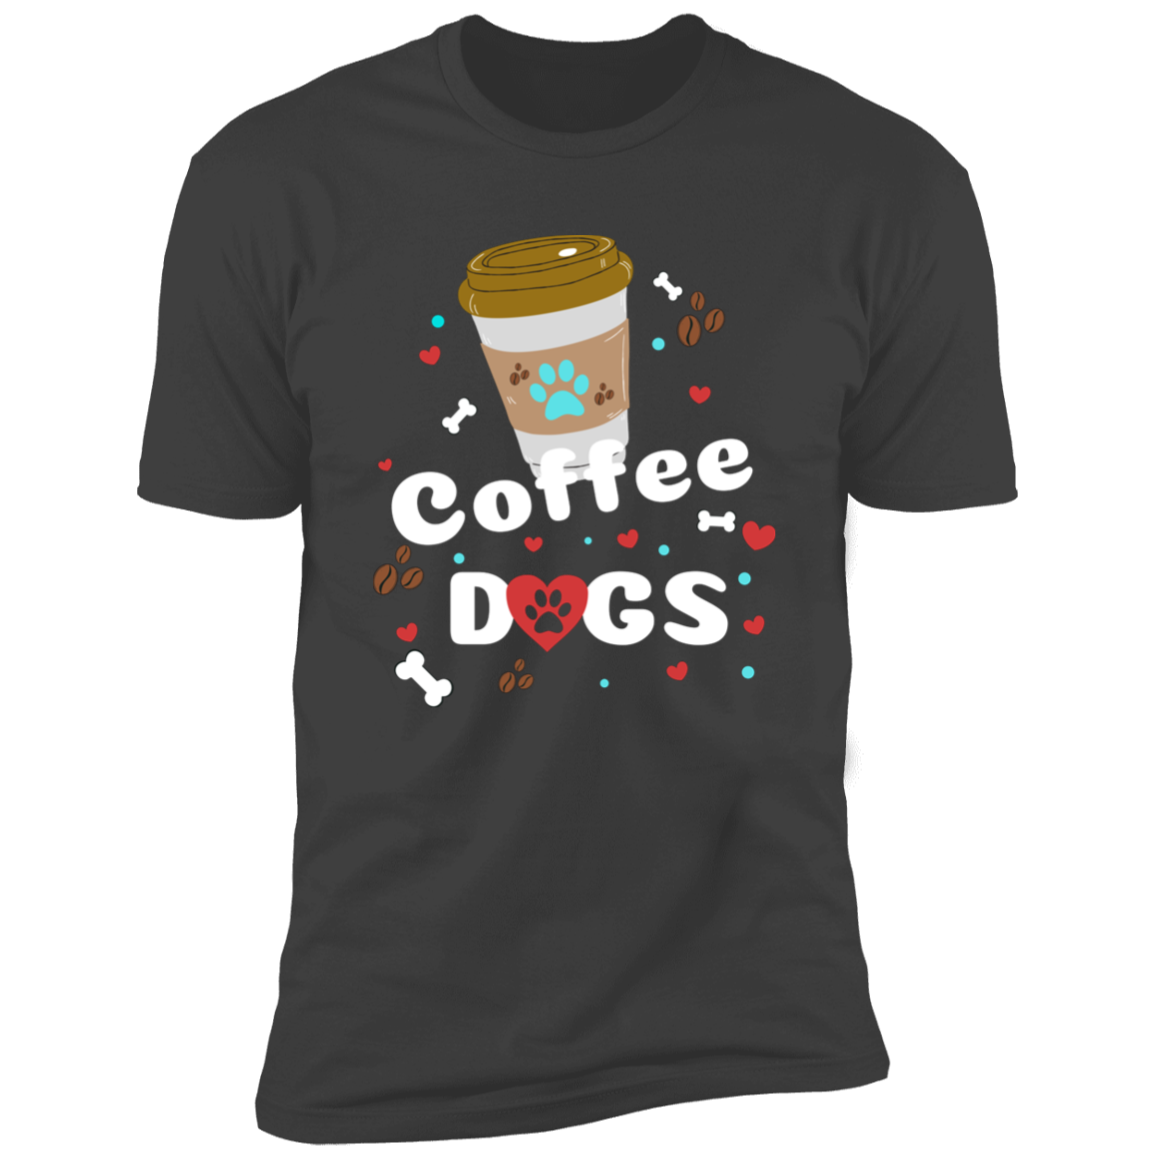 To go Coffee Dogs T-shirt, Dog Shirt for humans, in heavy metal gray